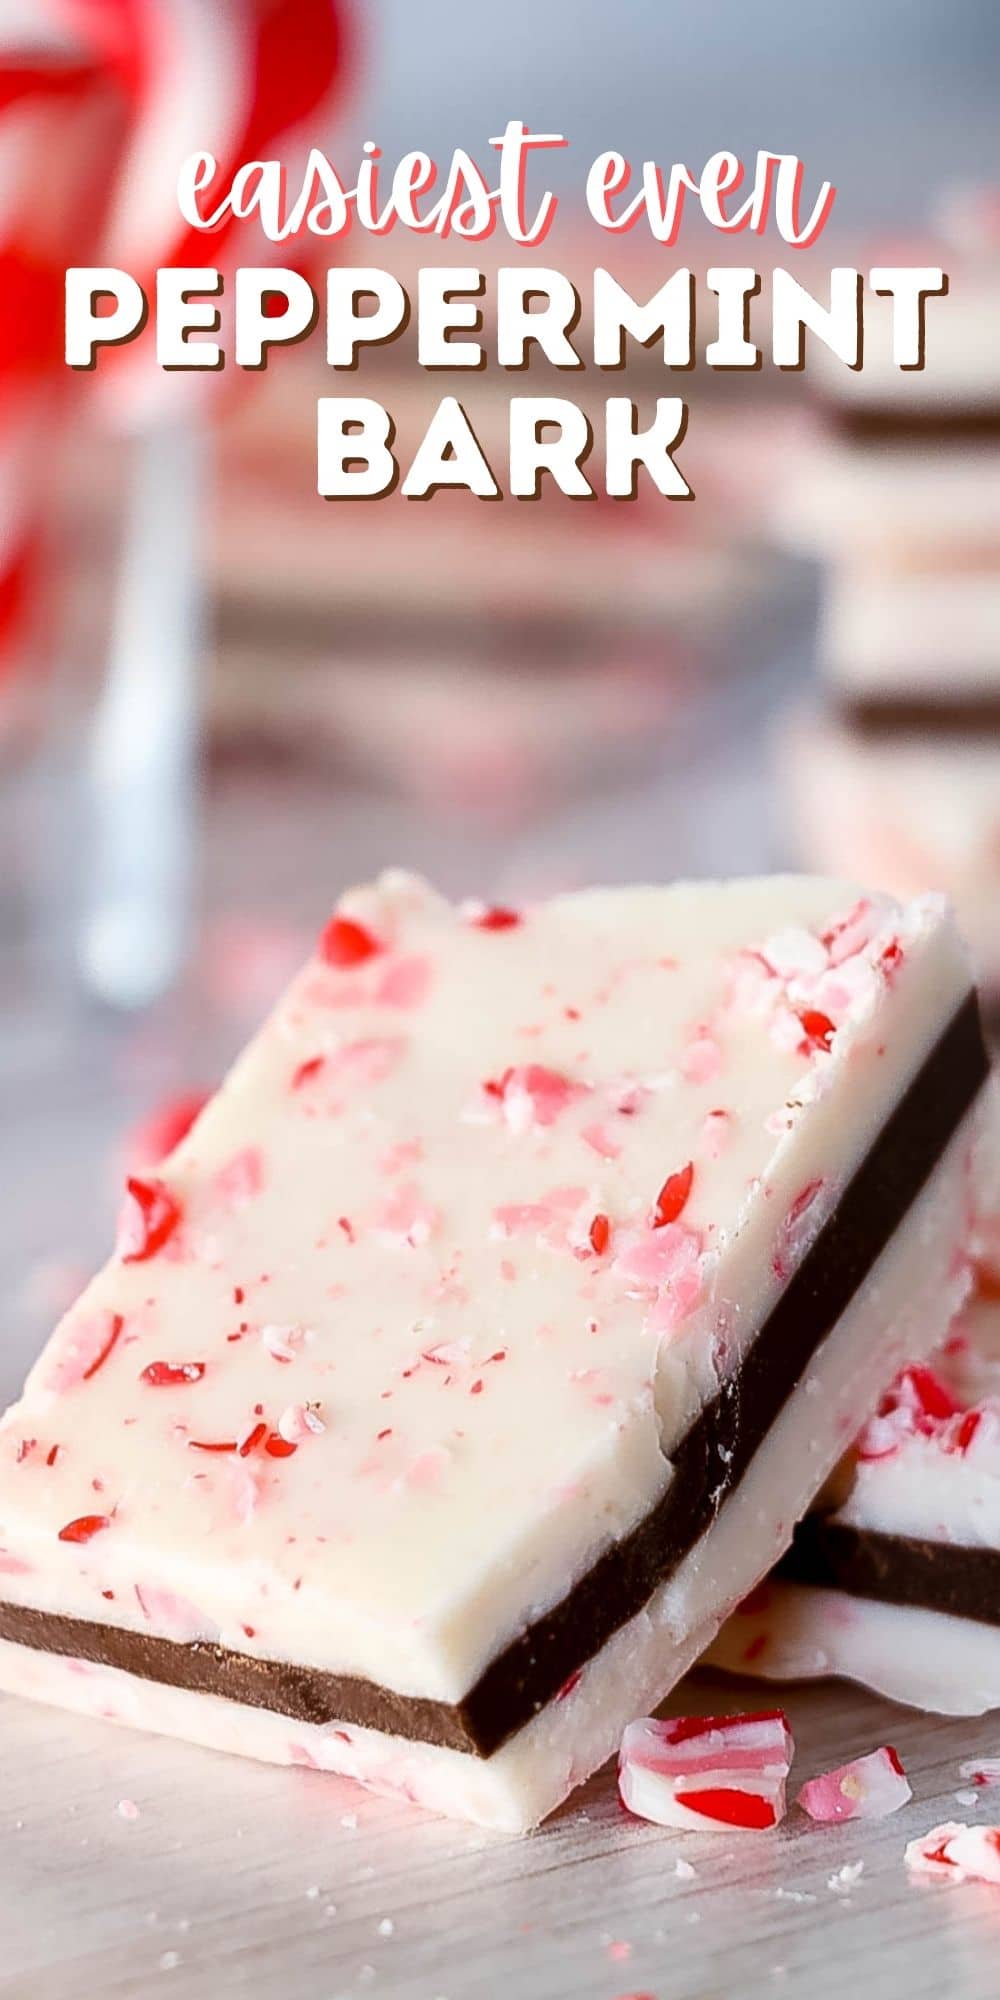 Close up of one peppermint bark piece with recipe title on top of image